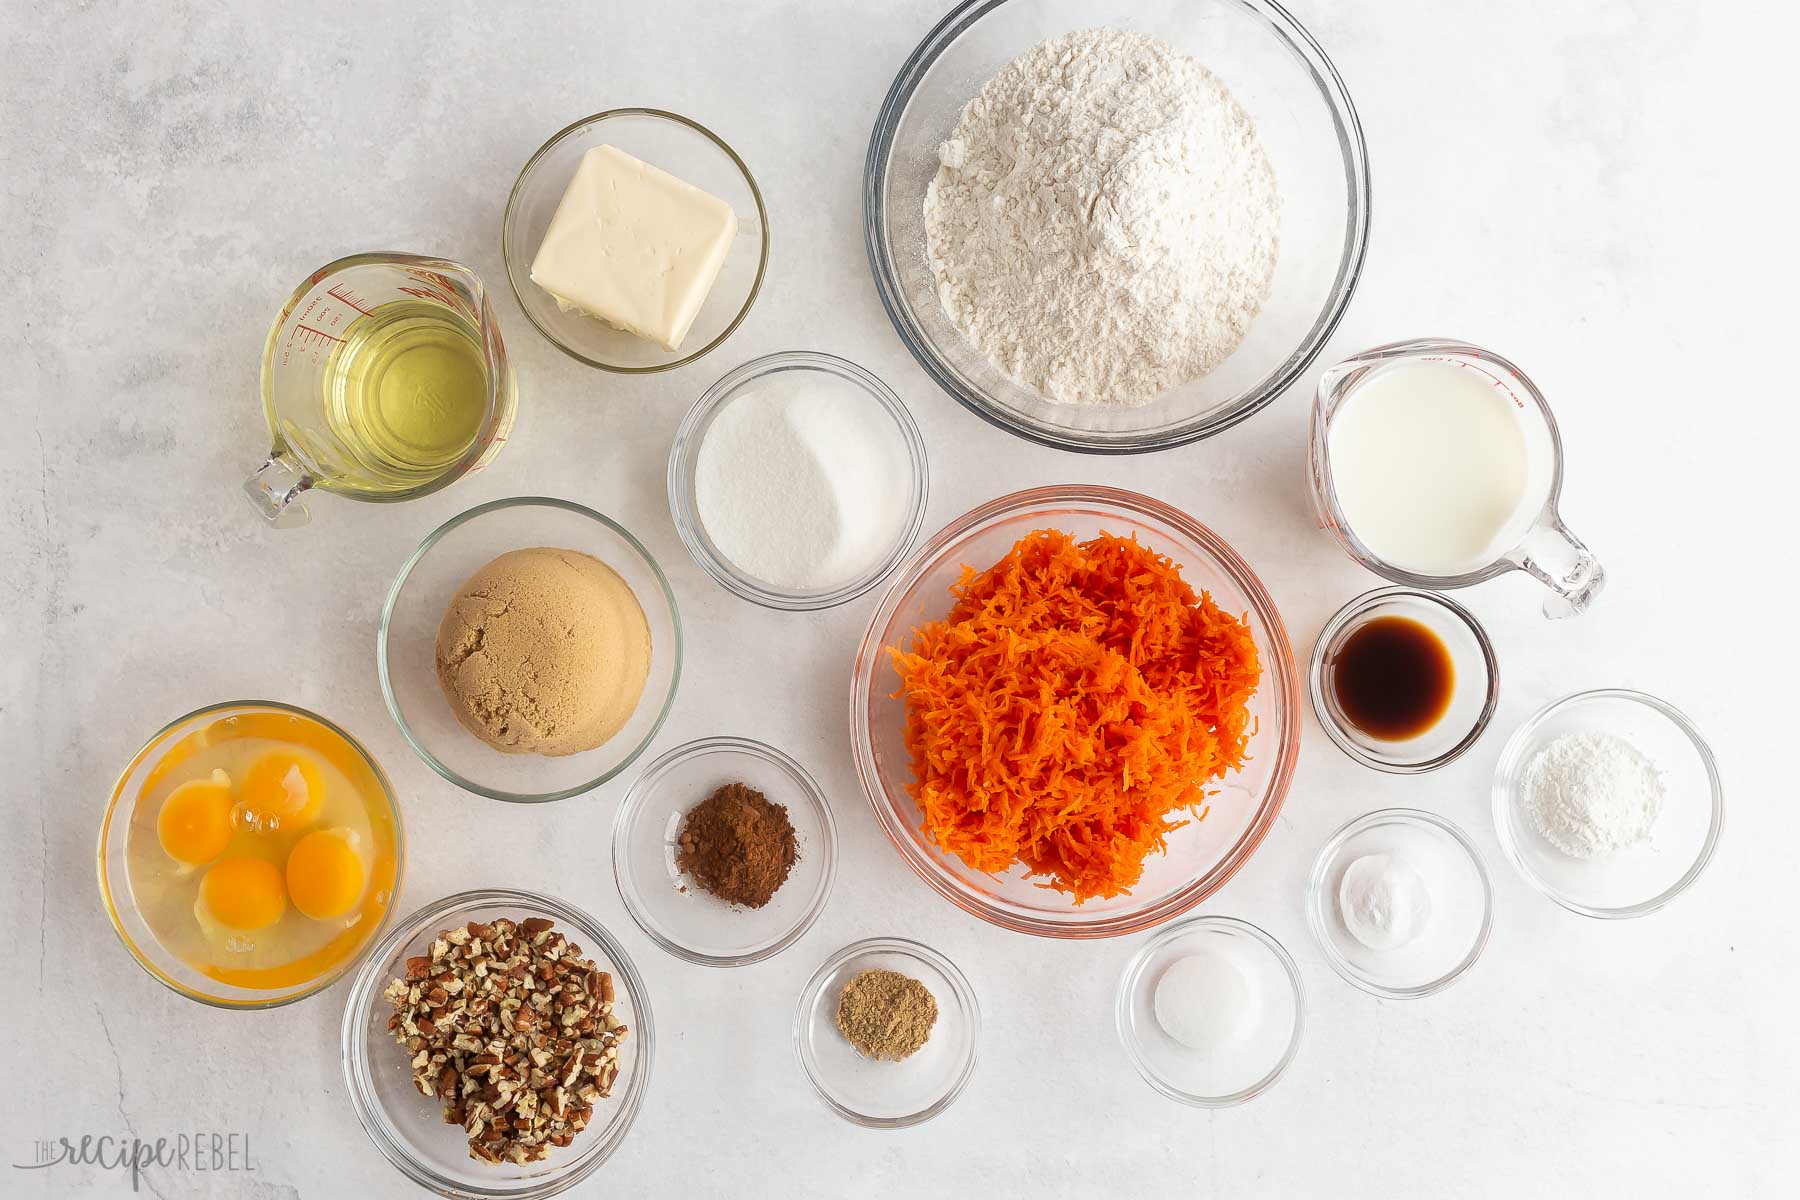 ingredients needed to make carrot cake